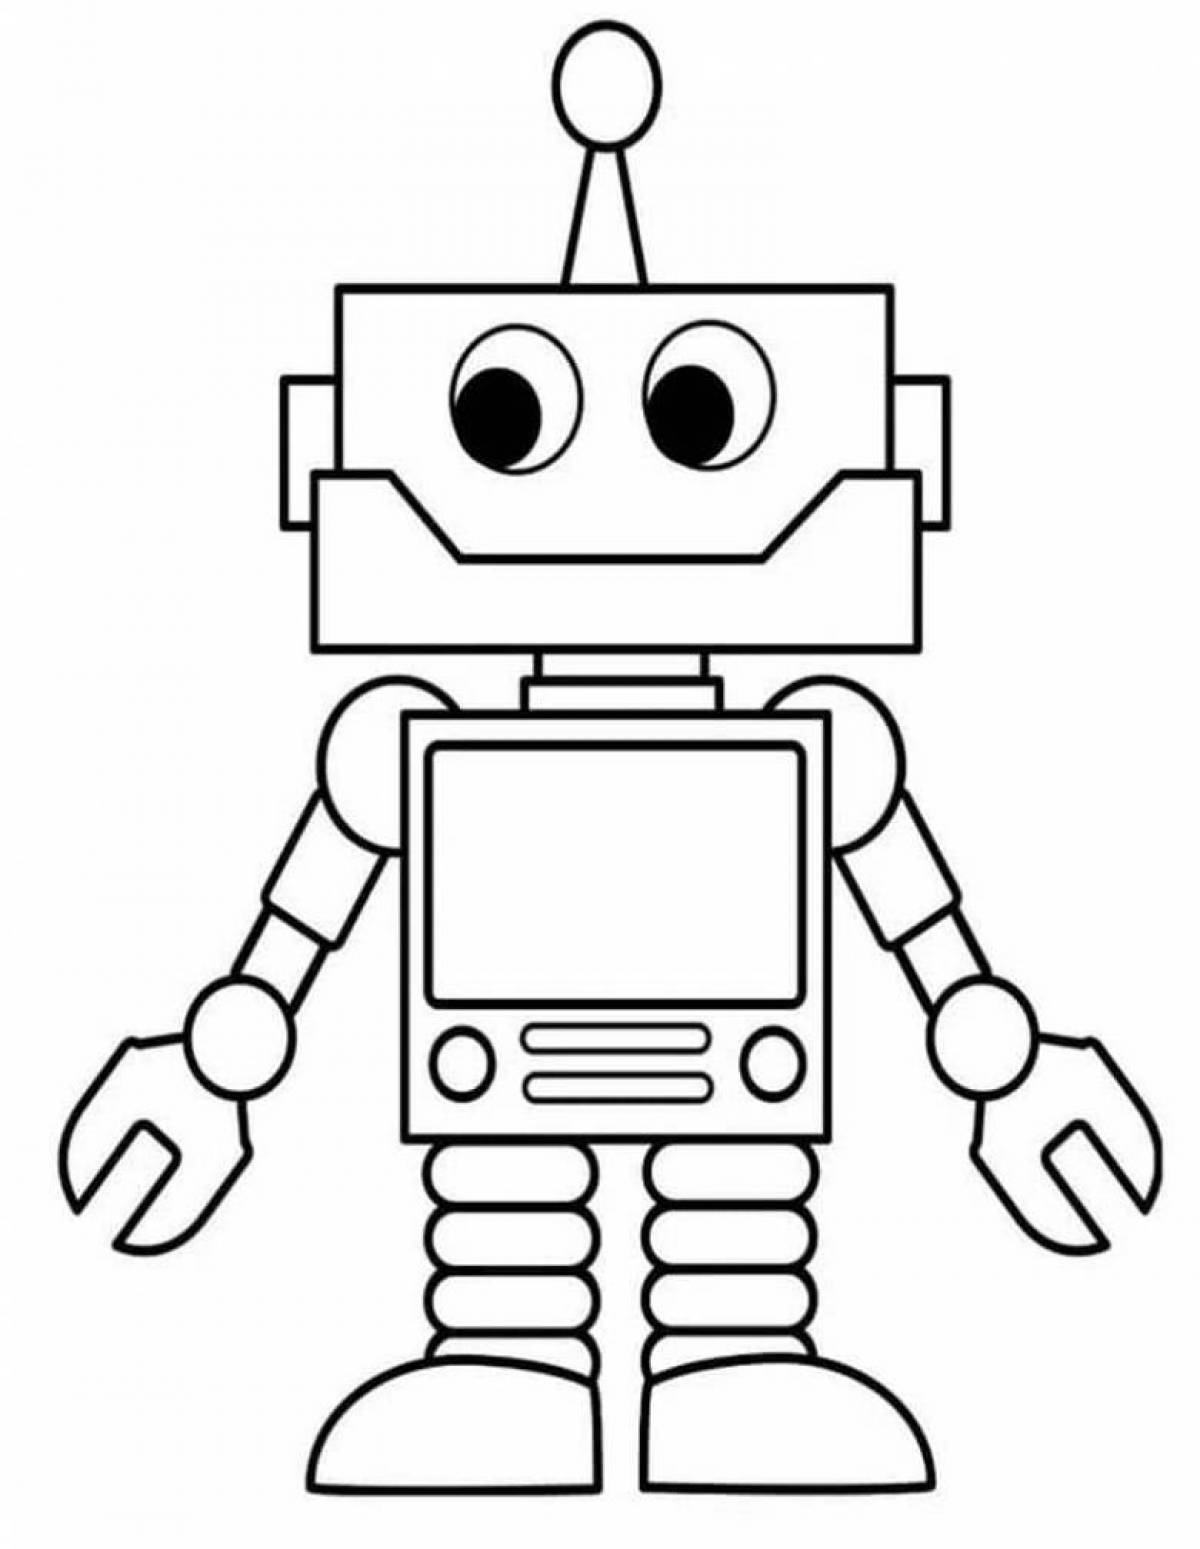 Robots for children 3 4 years old #17